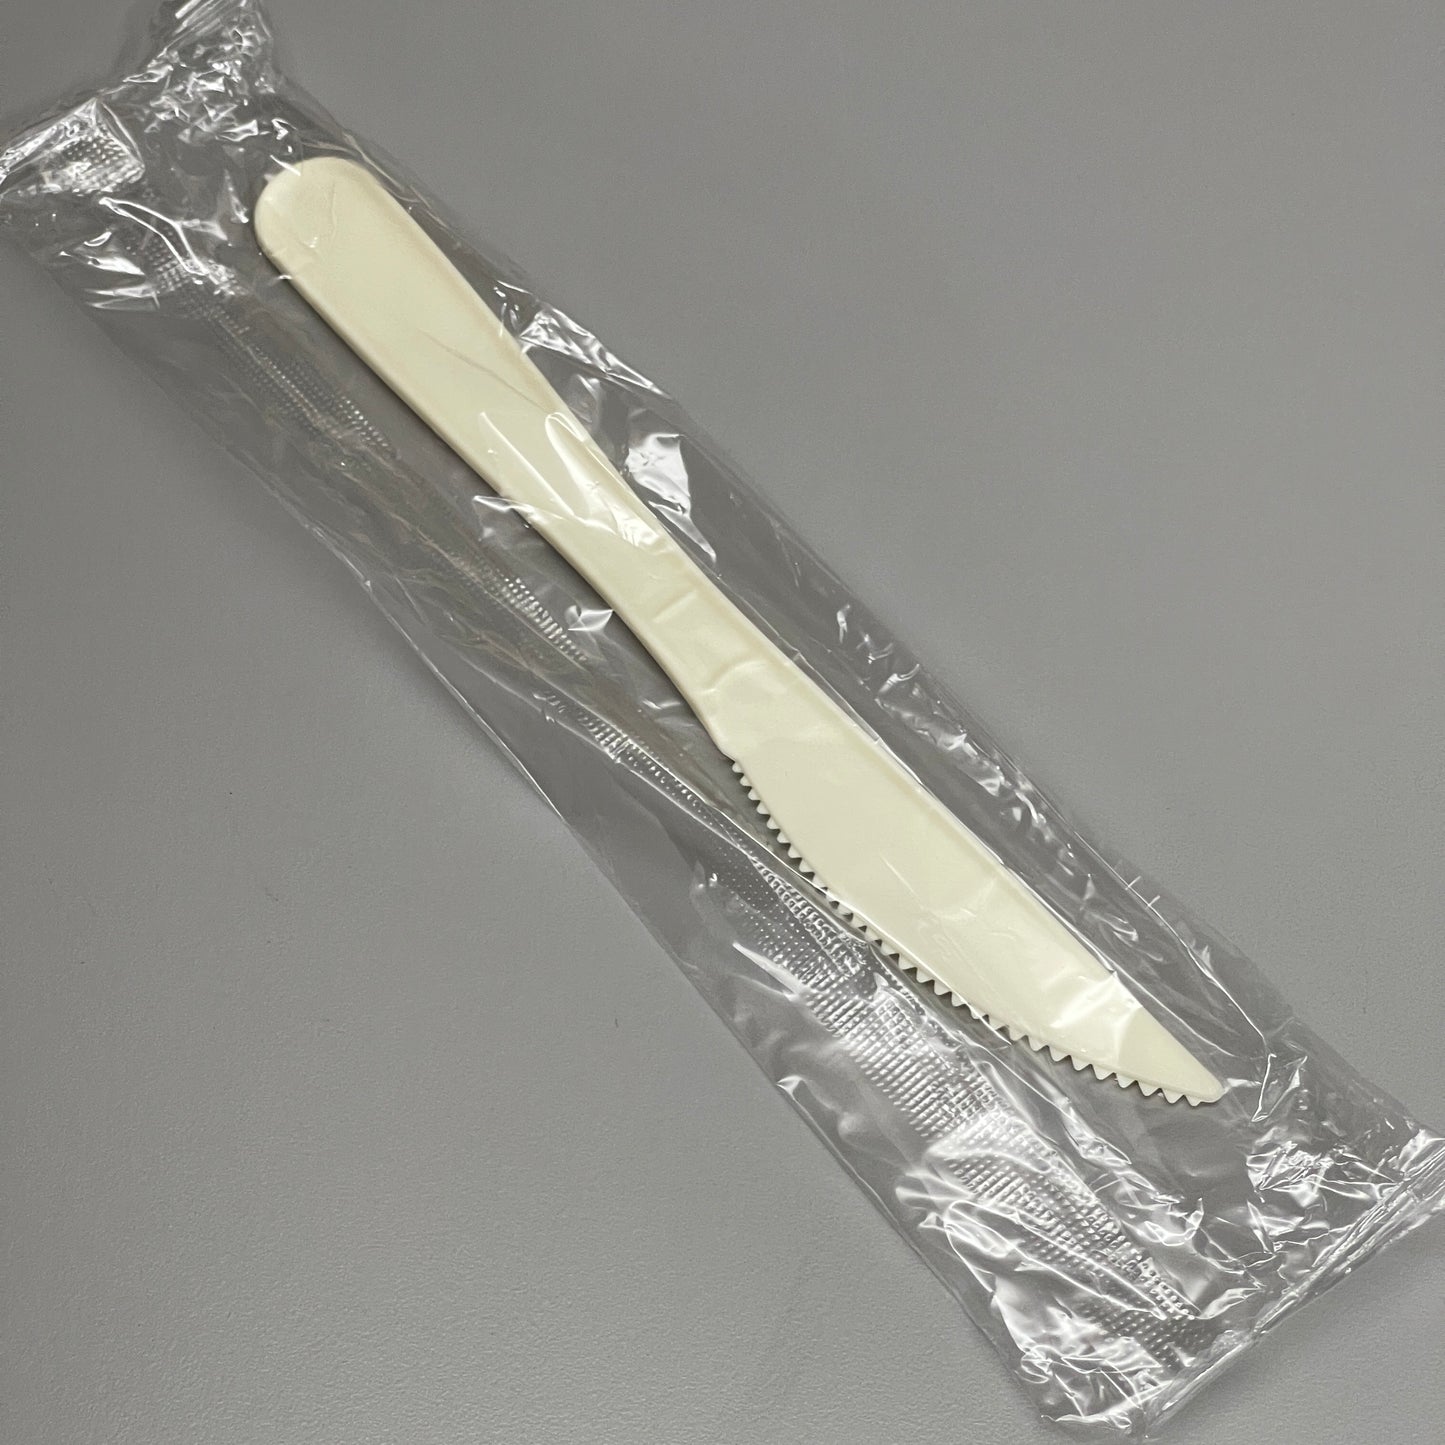 KANAK NATURALS Heavy Weight Flexible Plastic Knives Individually Wrapped 1000 ct Cream PC6201 (New)